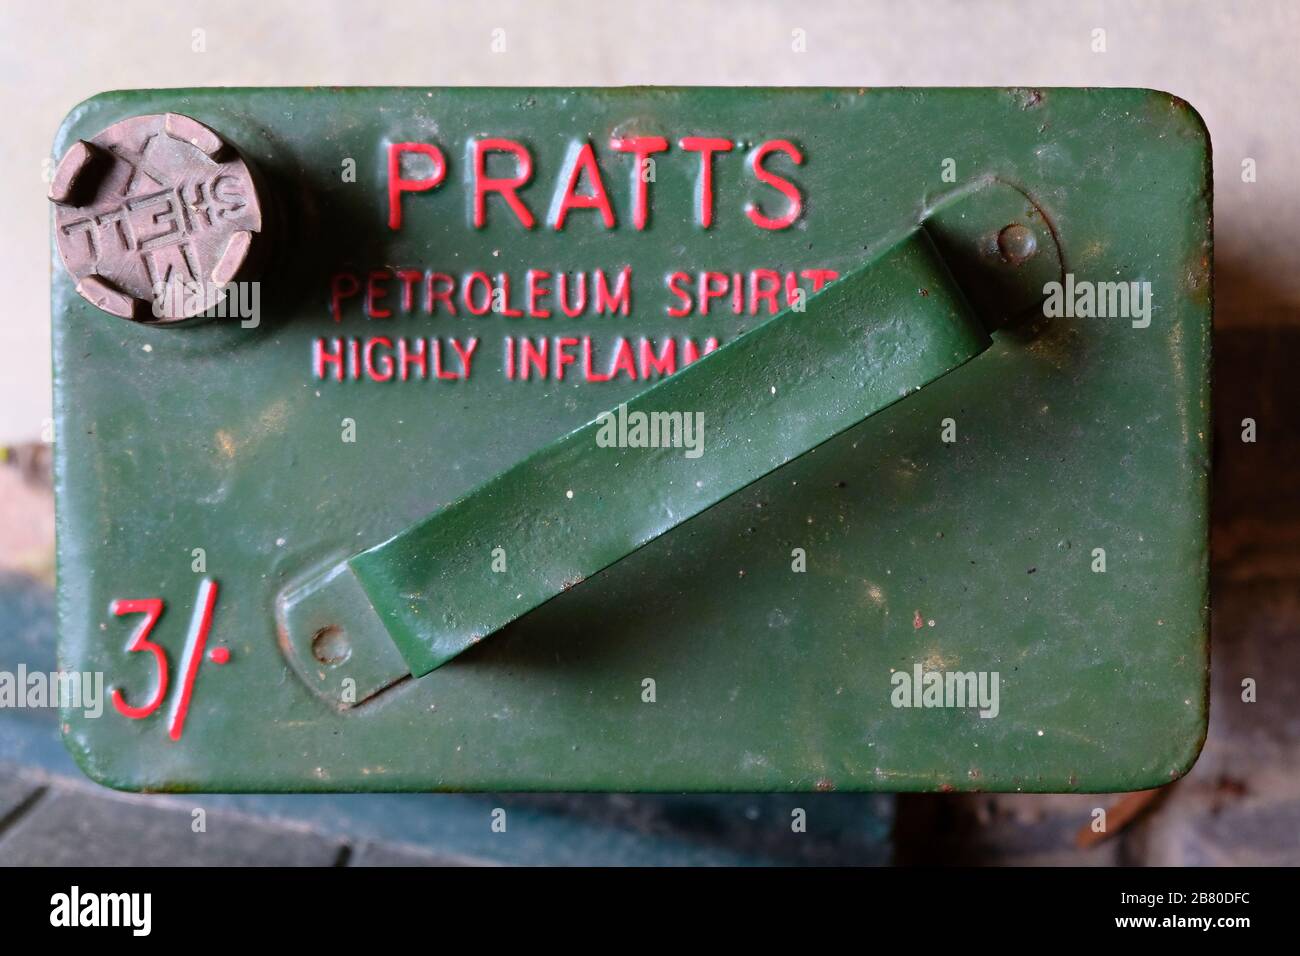 Close up of the top of a Pratt's Vintage Petrol Can marked highly inflammable Stock Photo